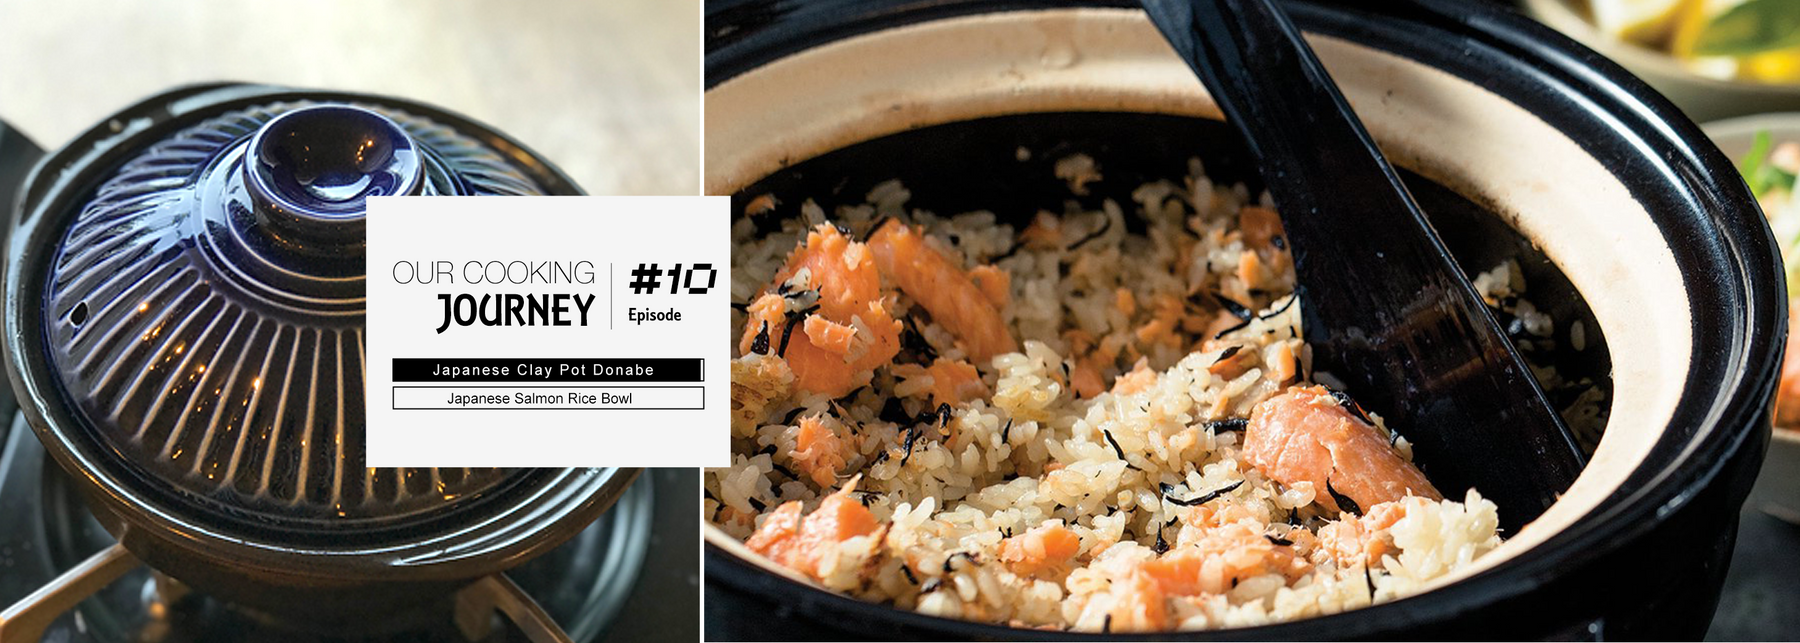 Recipe: Japanese Salmon Rice Bowl with Vegetables using Donabe Japanese Clay Pot